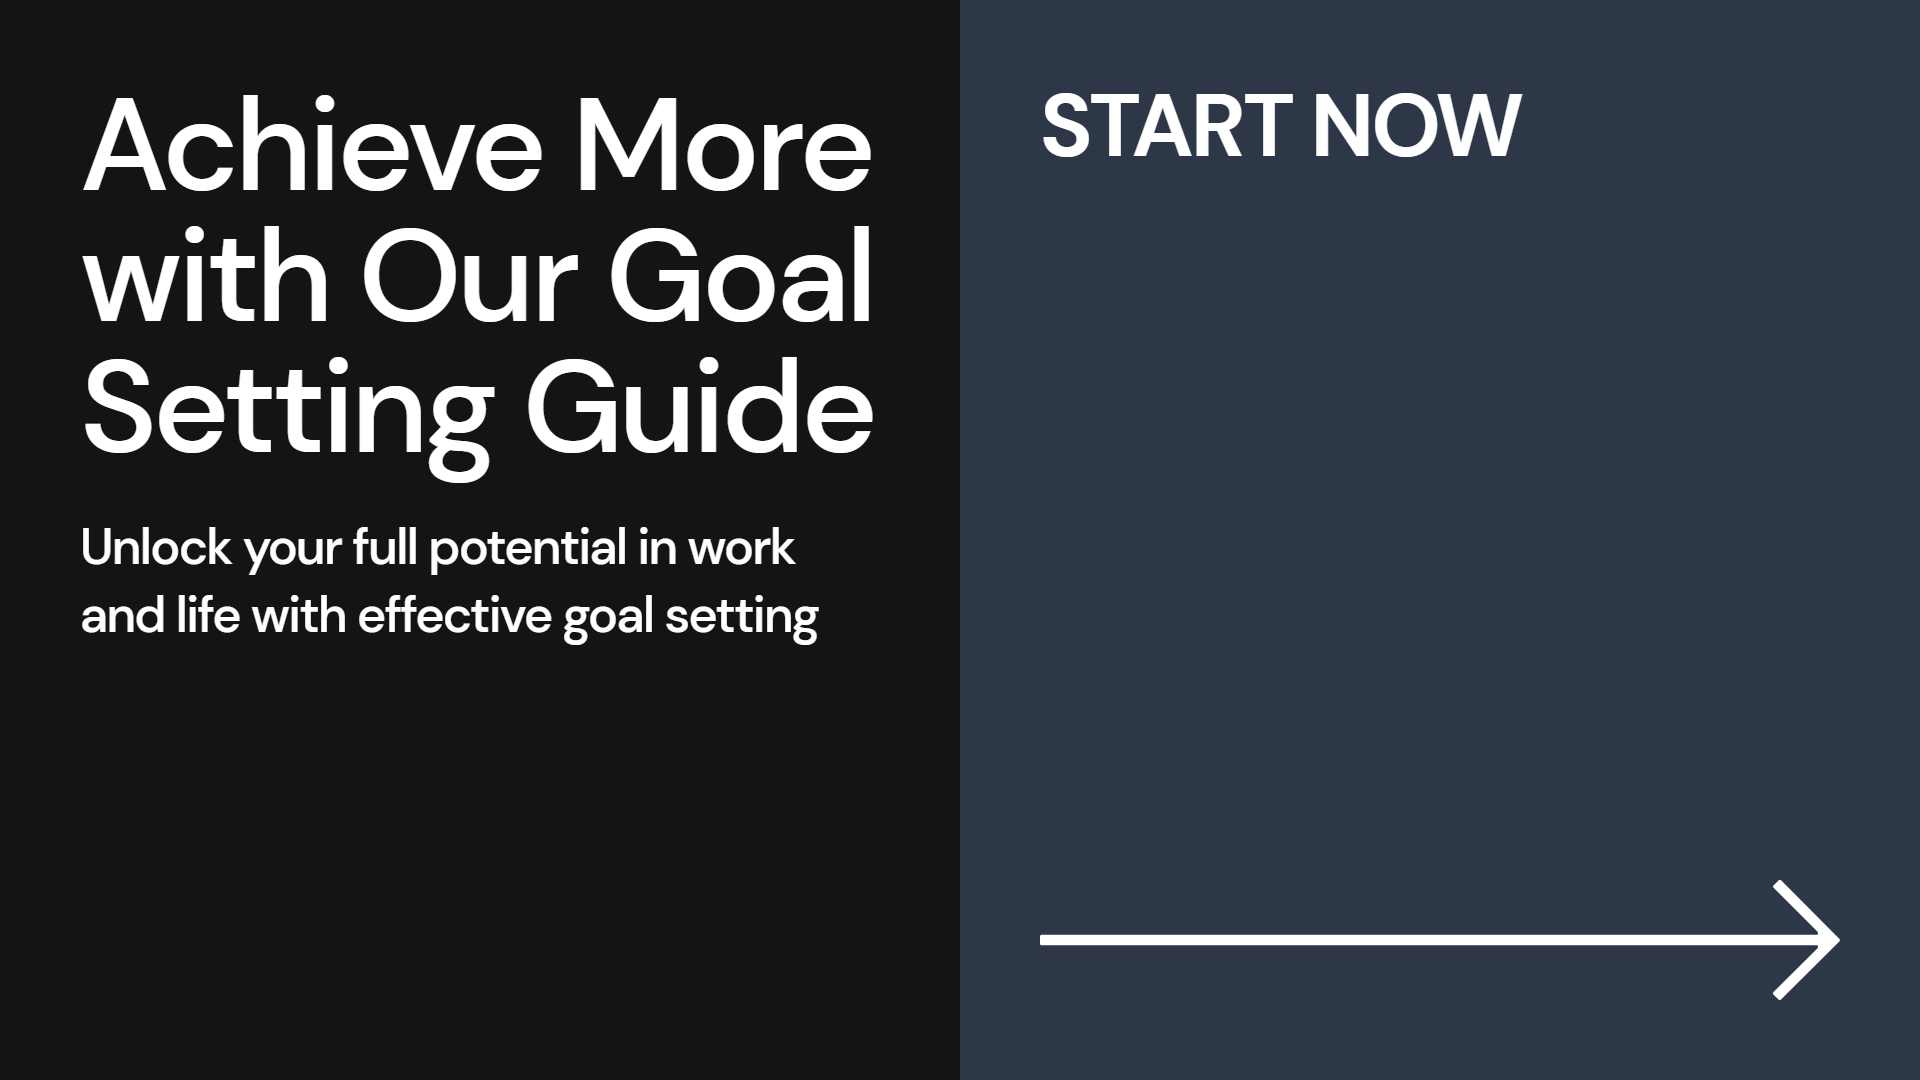 Goal Setting Guide: Use Goals to Improve Your Work & Life